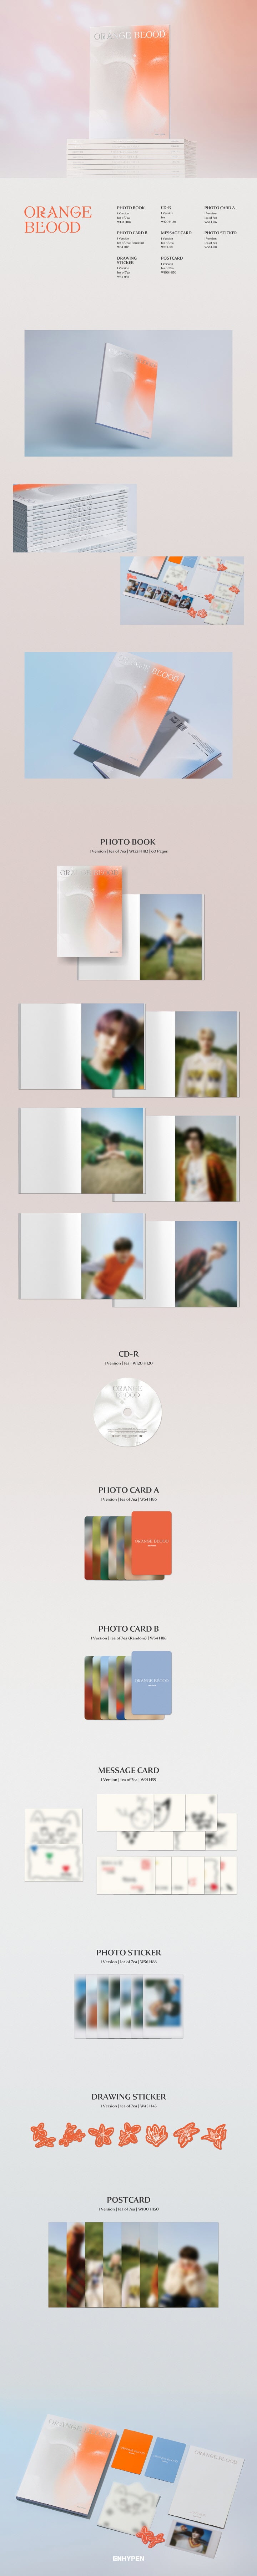 1 CD
1 Photo Book (60 pages)
1 Photo Card A (random out of 7 types)
1 Photo Card B (random out of 7 types)
1 Message Card ...